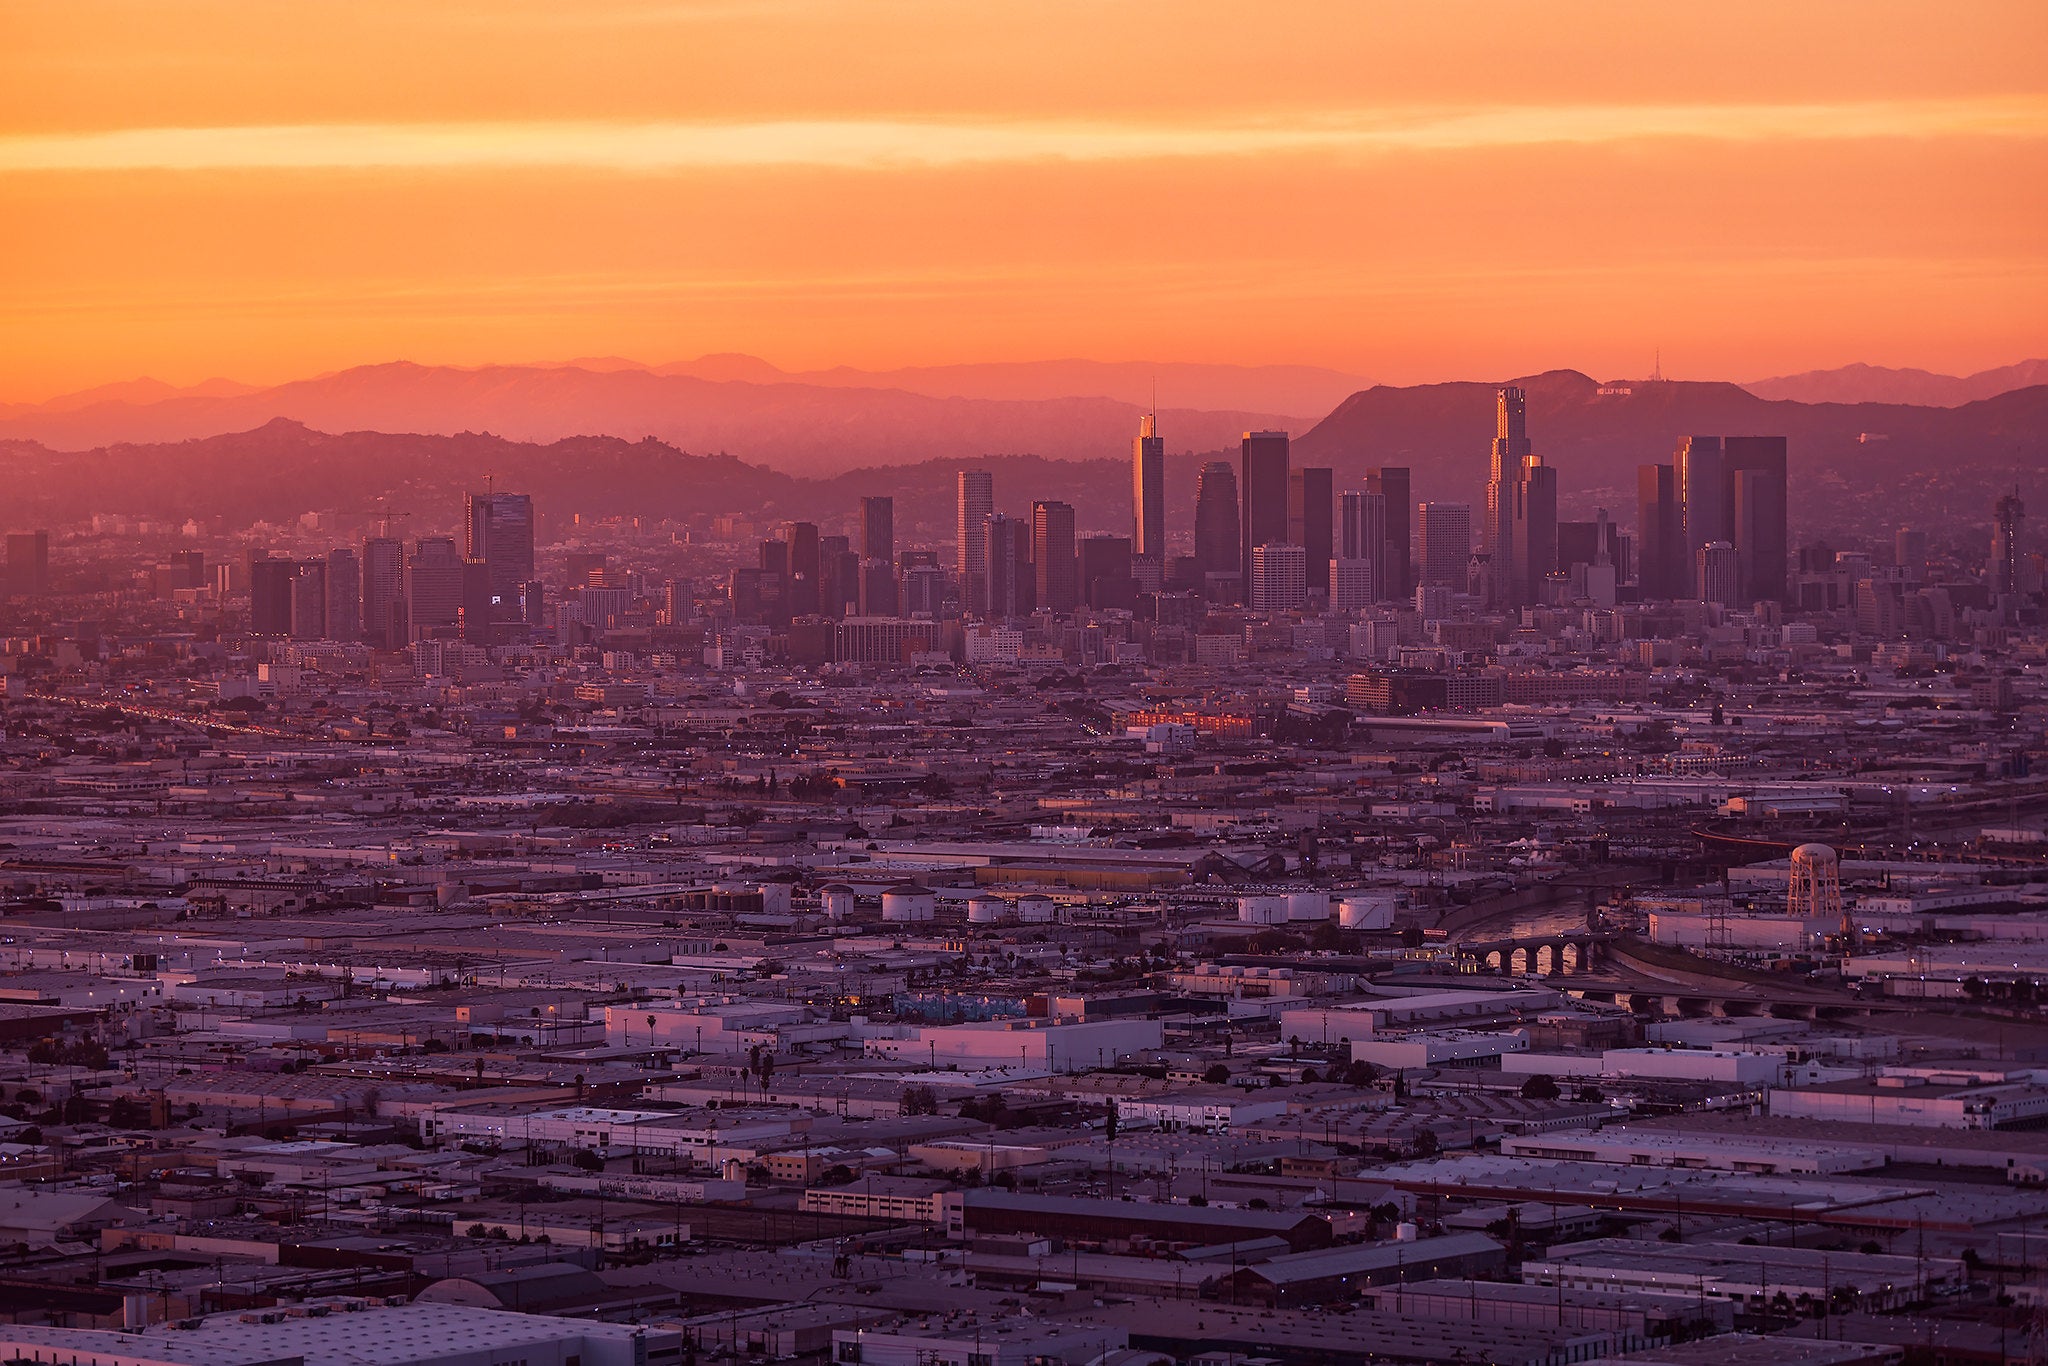 A sunset over downtown LA, captured from a helicopter.